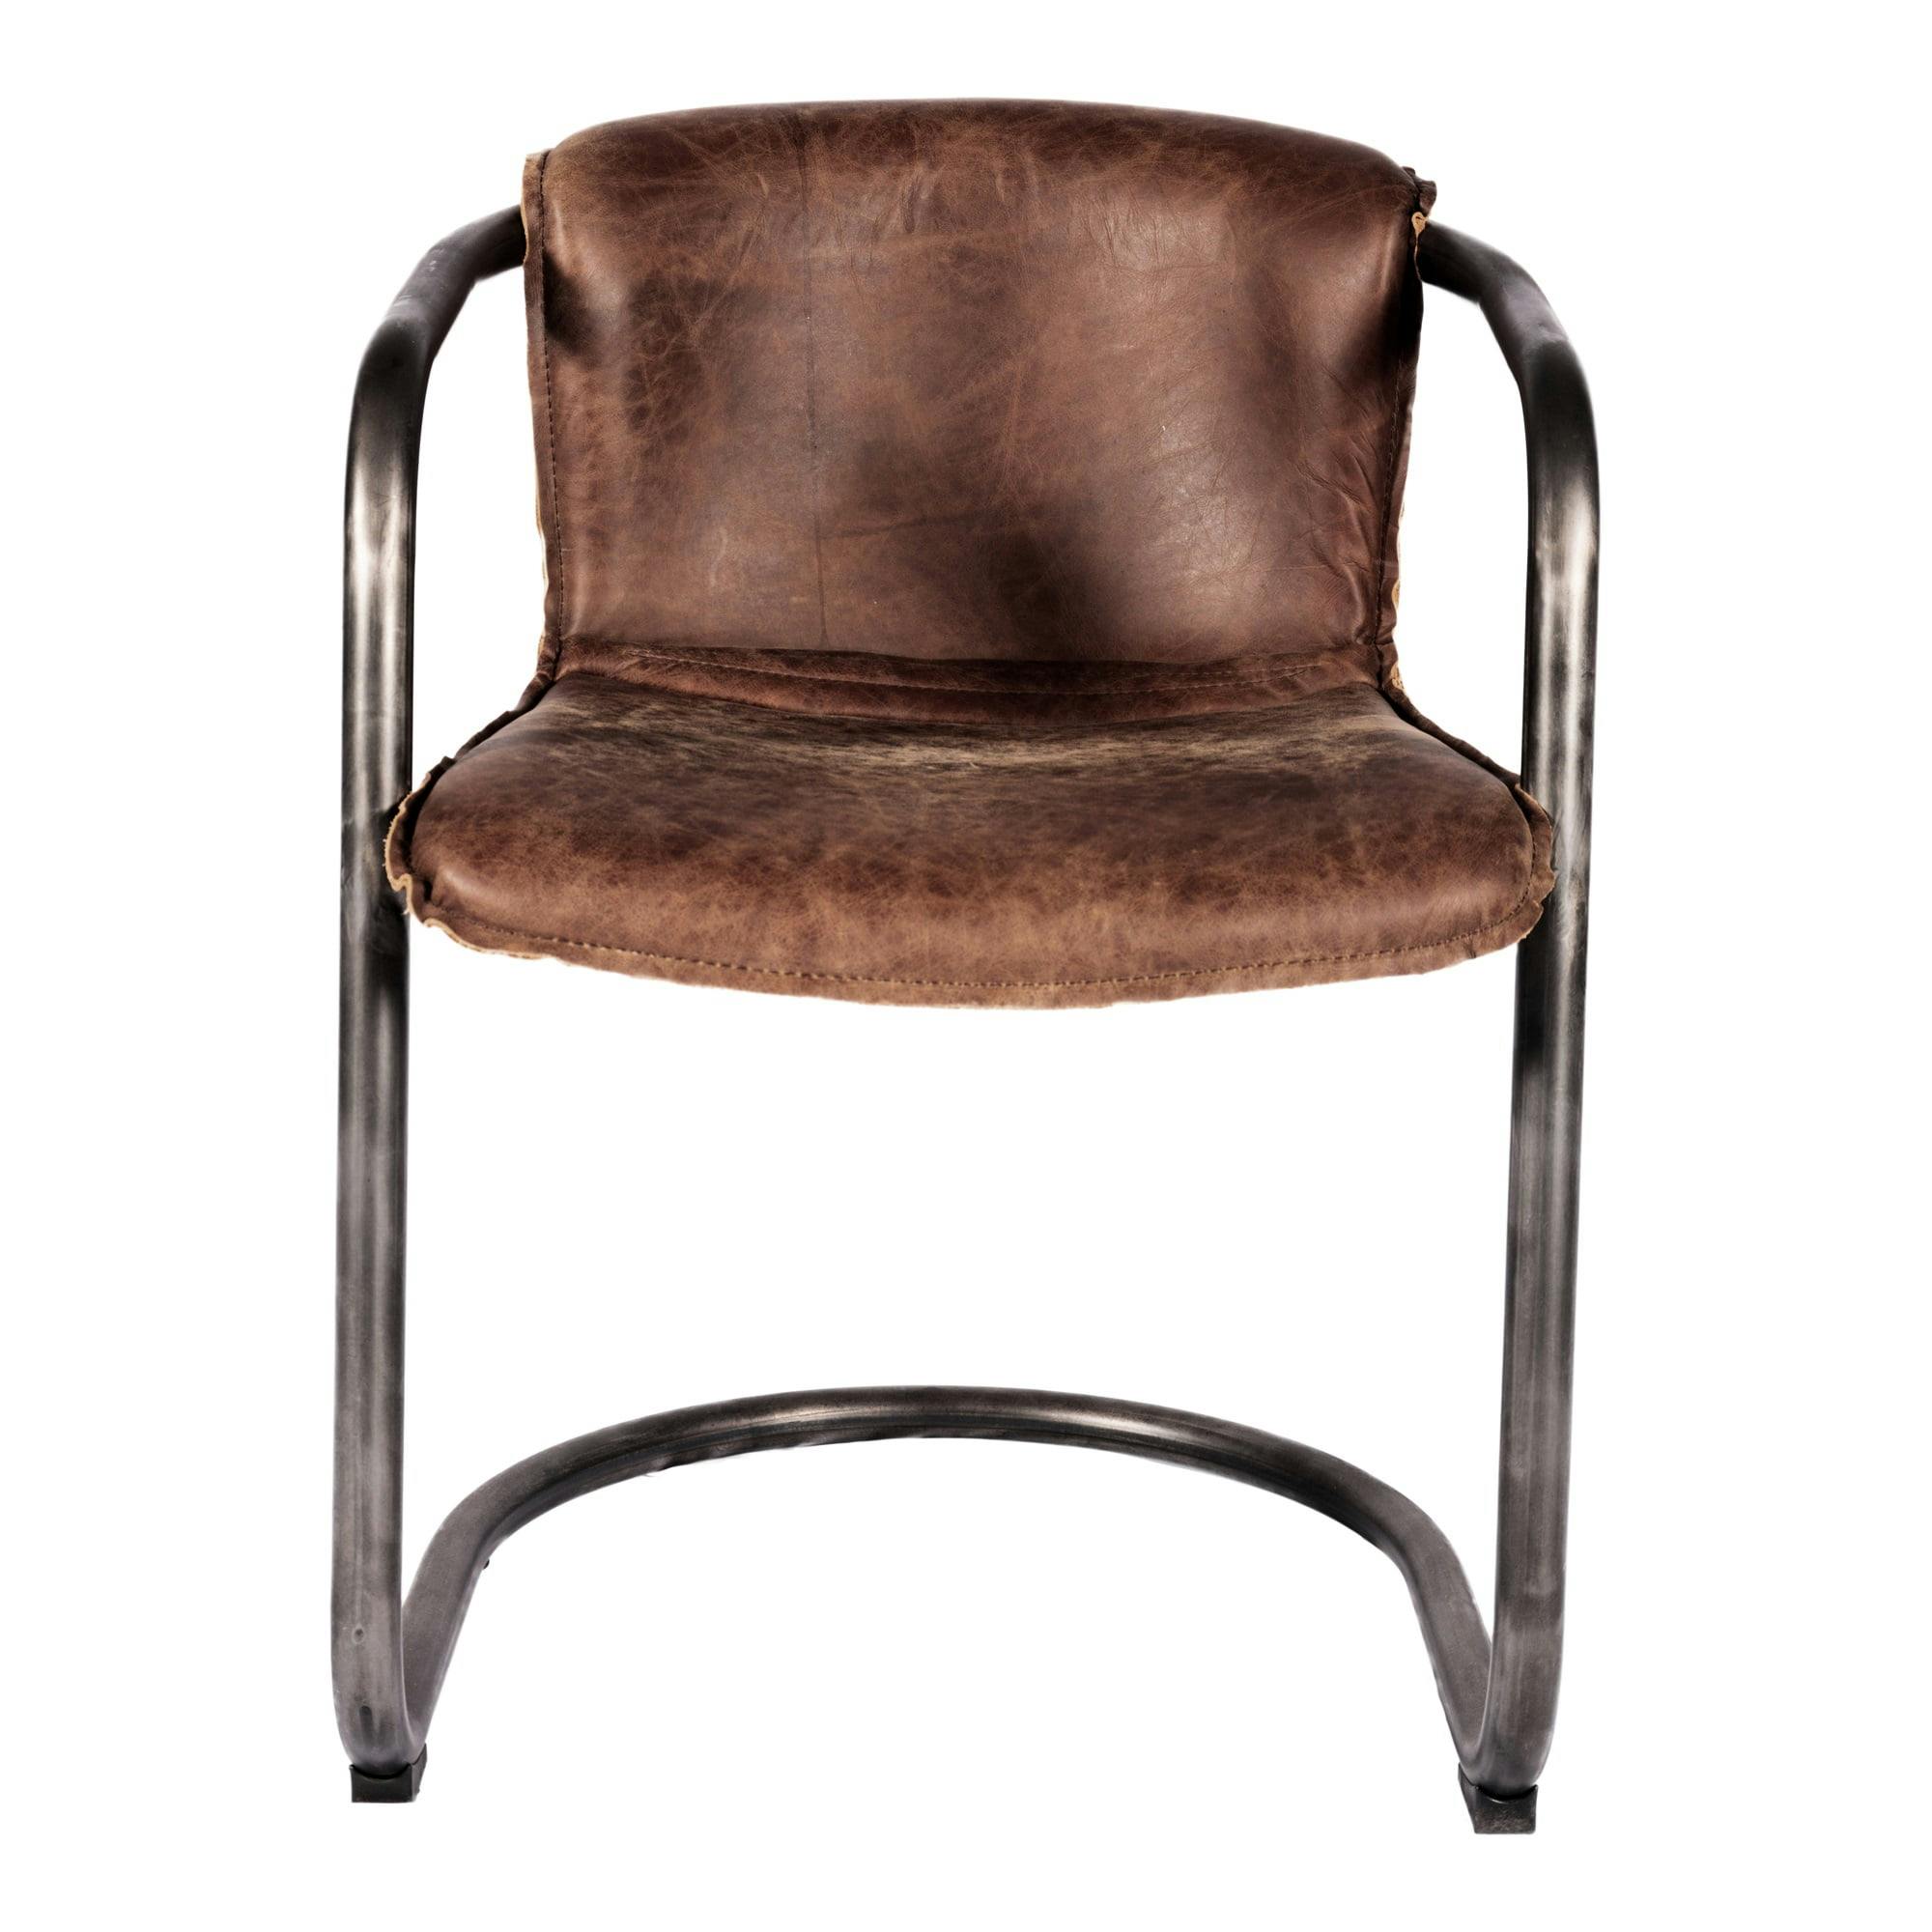 Baldry Transitional Brown Leather Arm Chair with Metal Frame